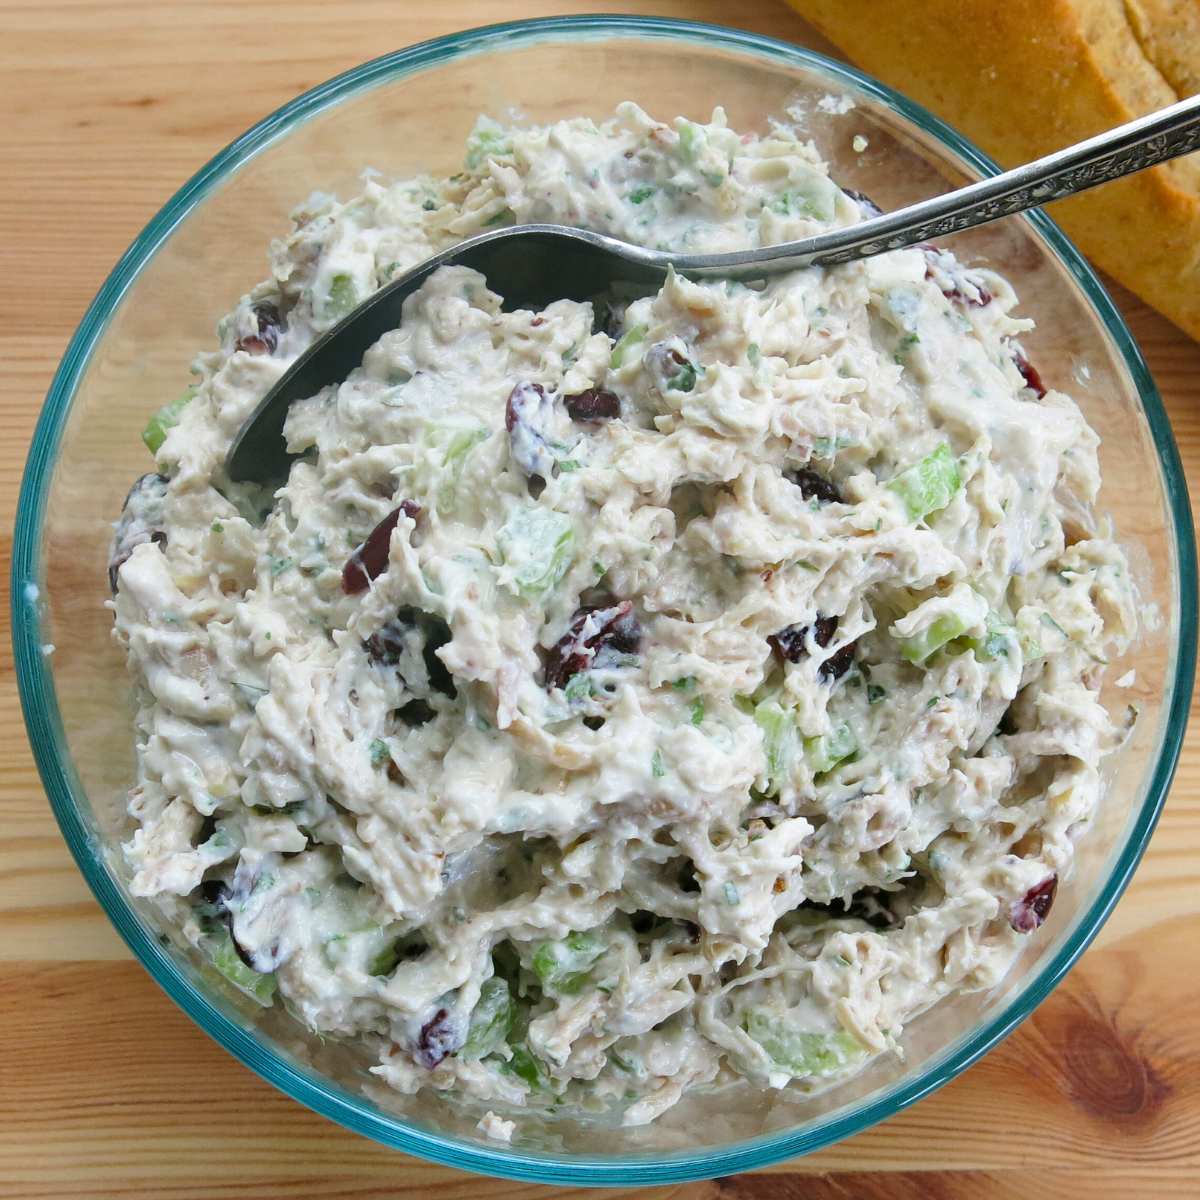 Creamy shredded chicken salad made with leftover chicken in a glass bowl with a spoon.